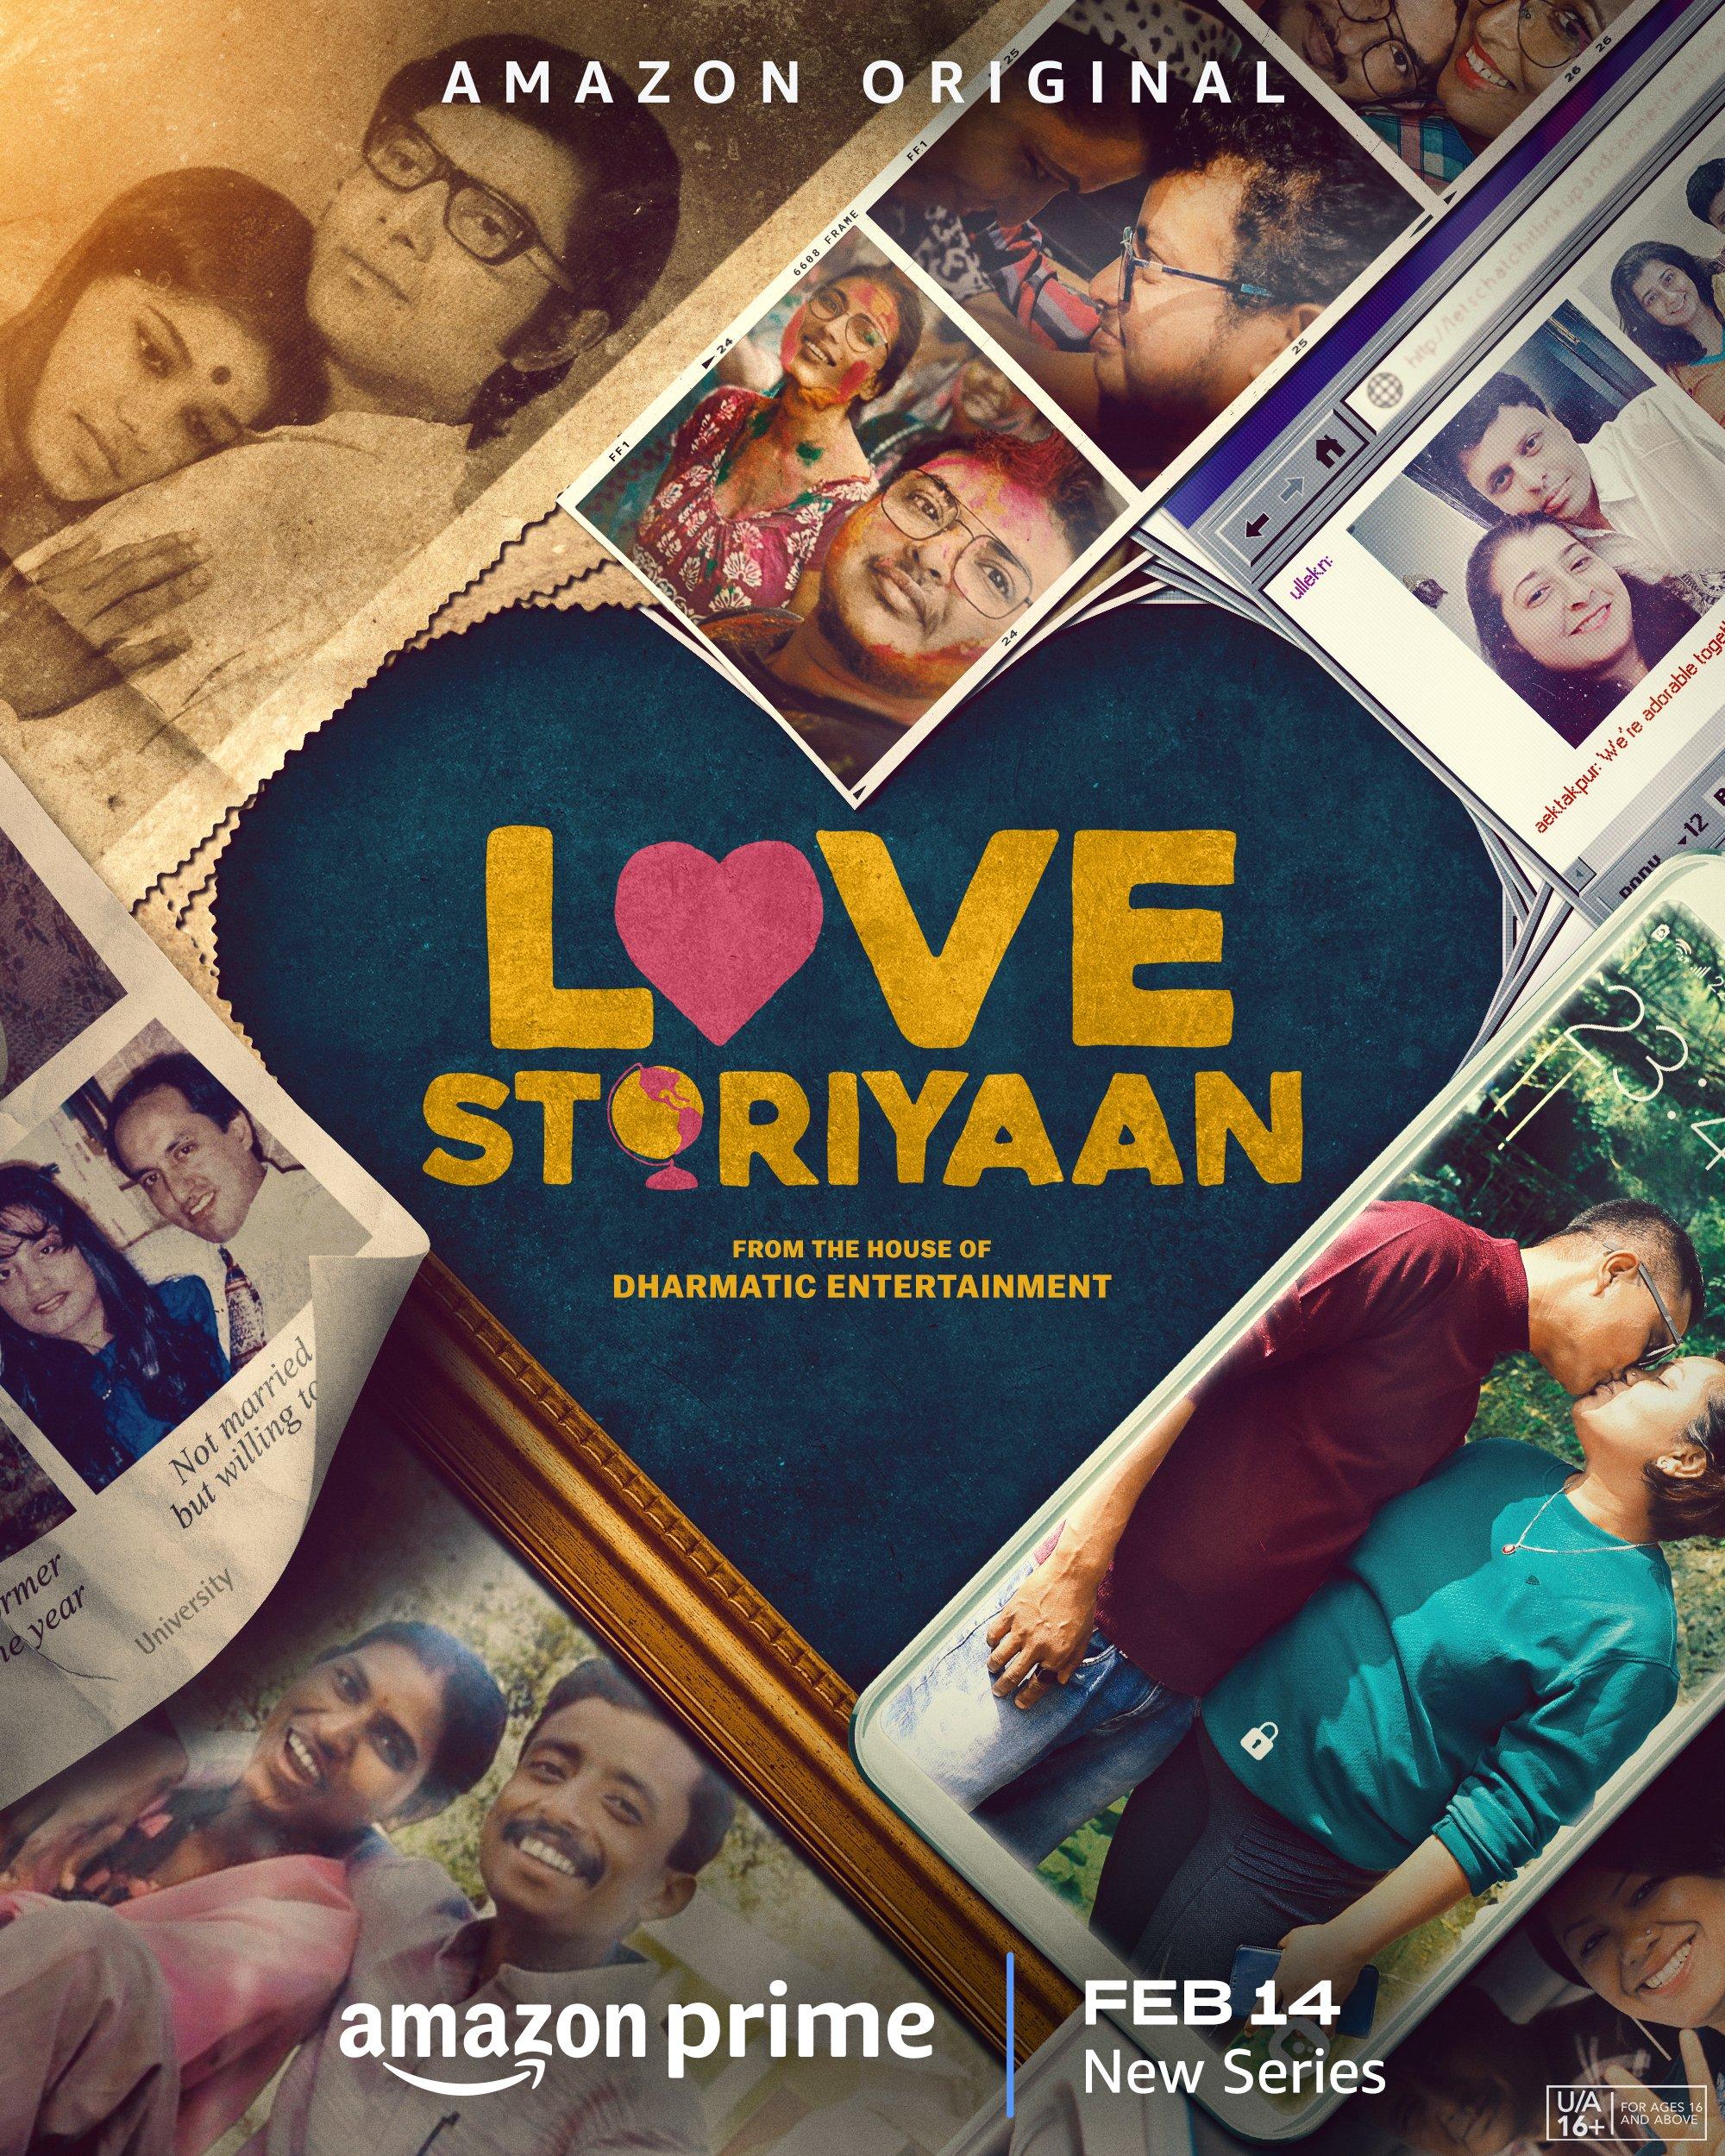 Love Storiyaan (February 14) - Streaming on Prime VideoLove Storiyaan, presented by Karan Johar’s Dharmatic Entertainment, is a heartwarming series exploring the profound complexities of love through six real-life stories. Each episode delves into the unique tales of different couples, showcasing their journey of overcoming obstacles for their beloved. Inspired by stories from the India Love Project, the series is a celebration of love’s triumph over barriers such as culture, faith, gender, and even war.